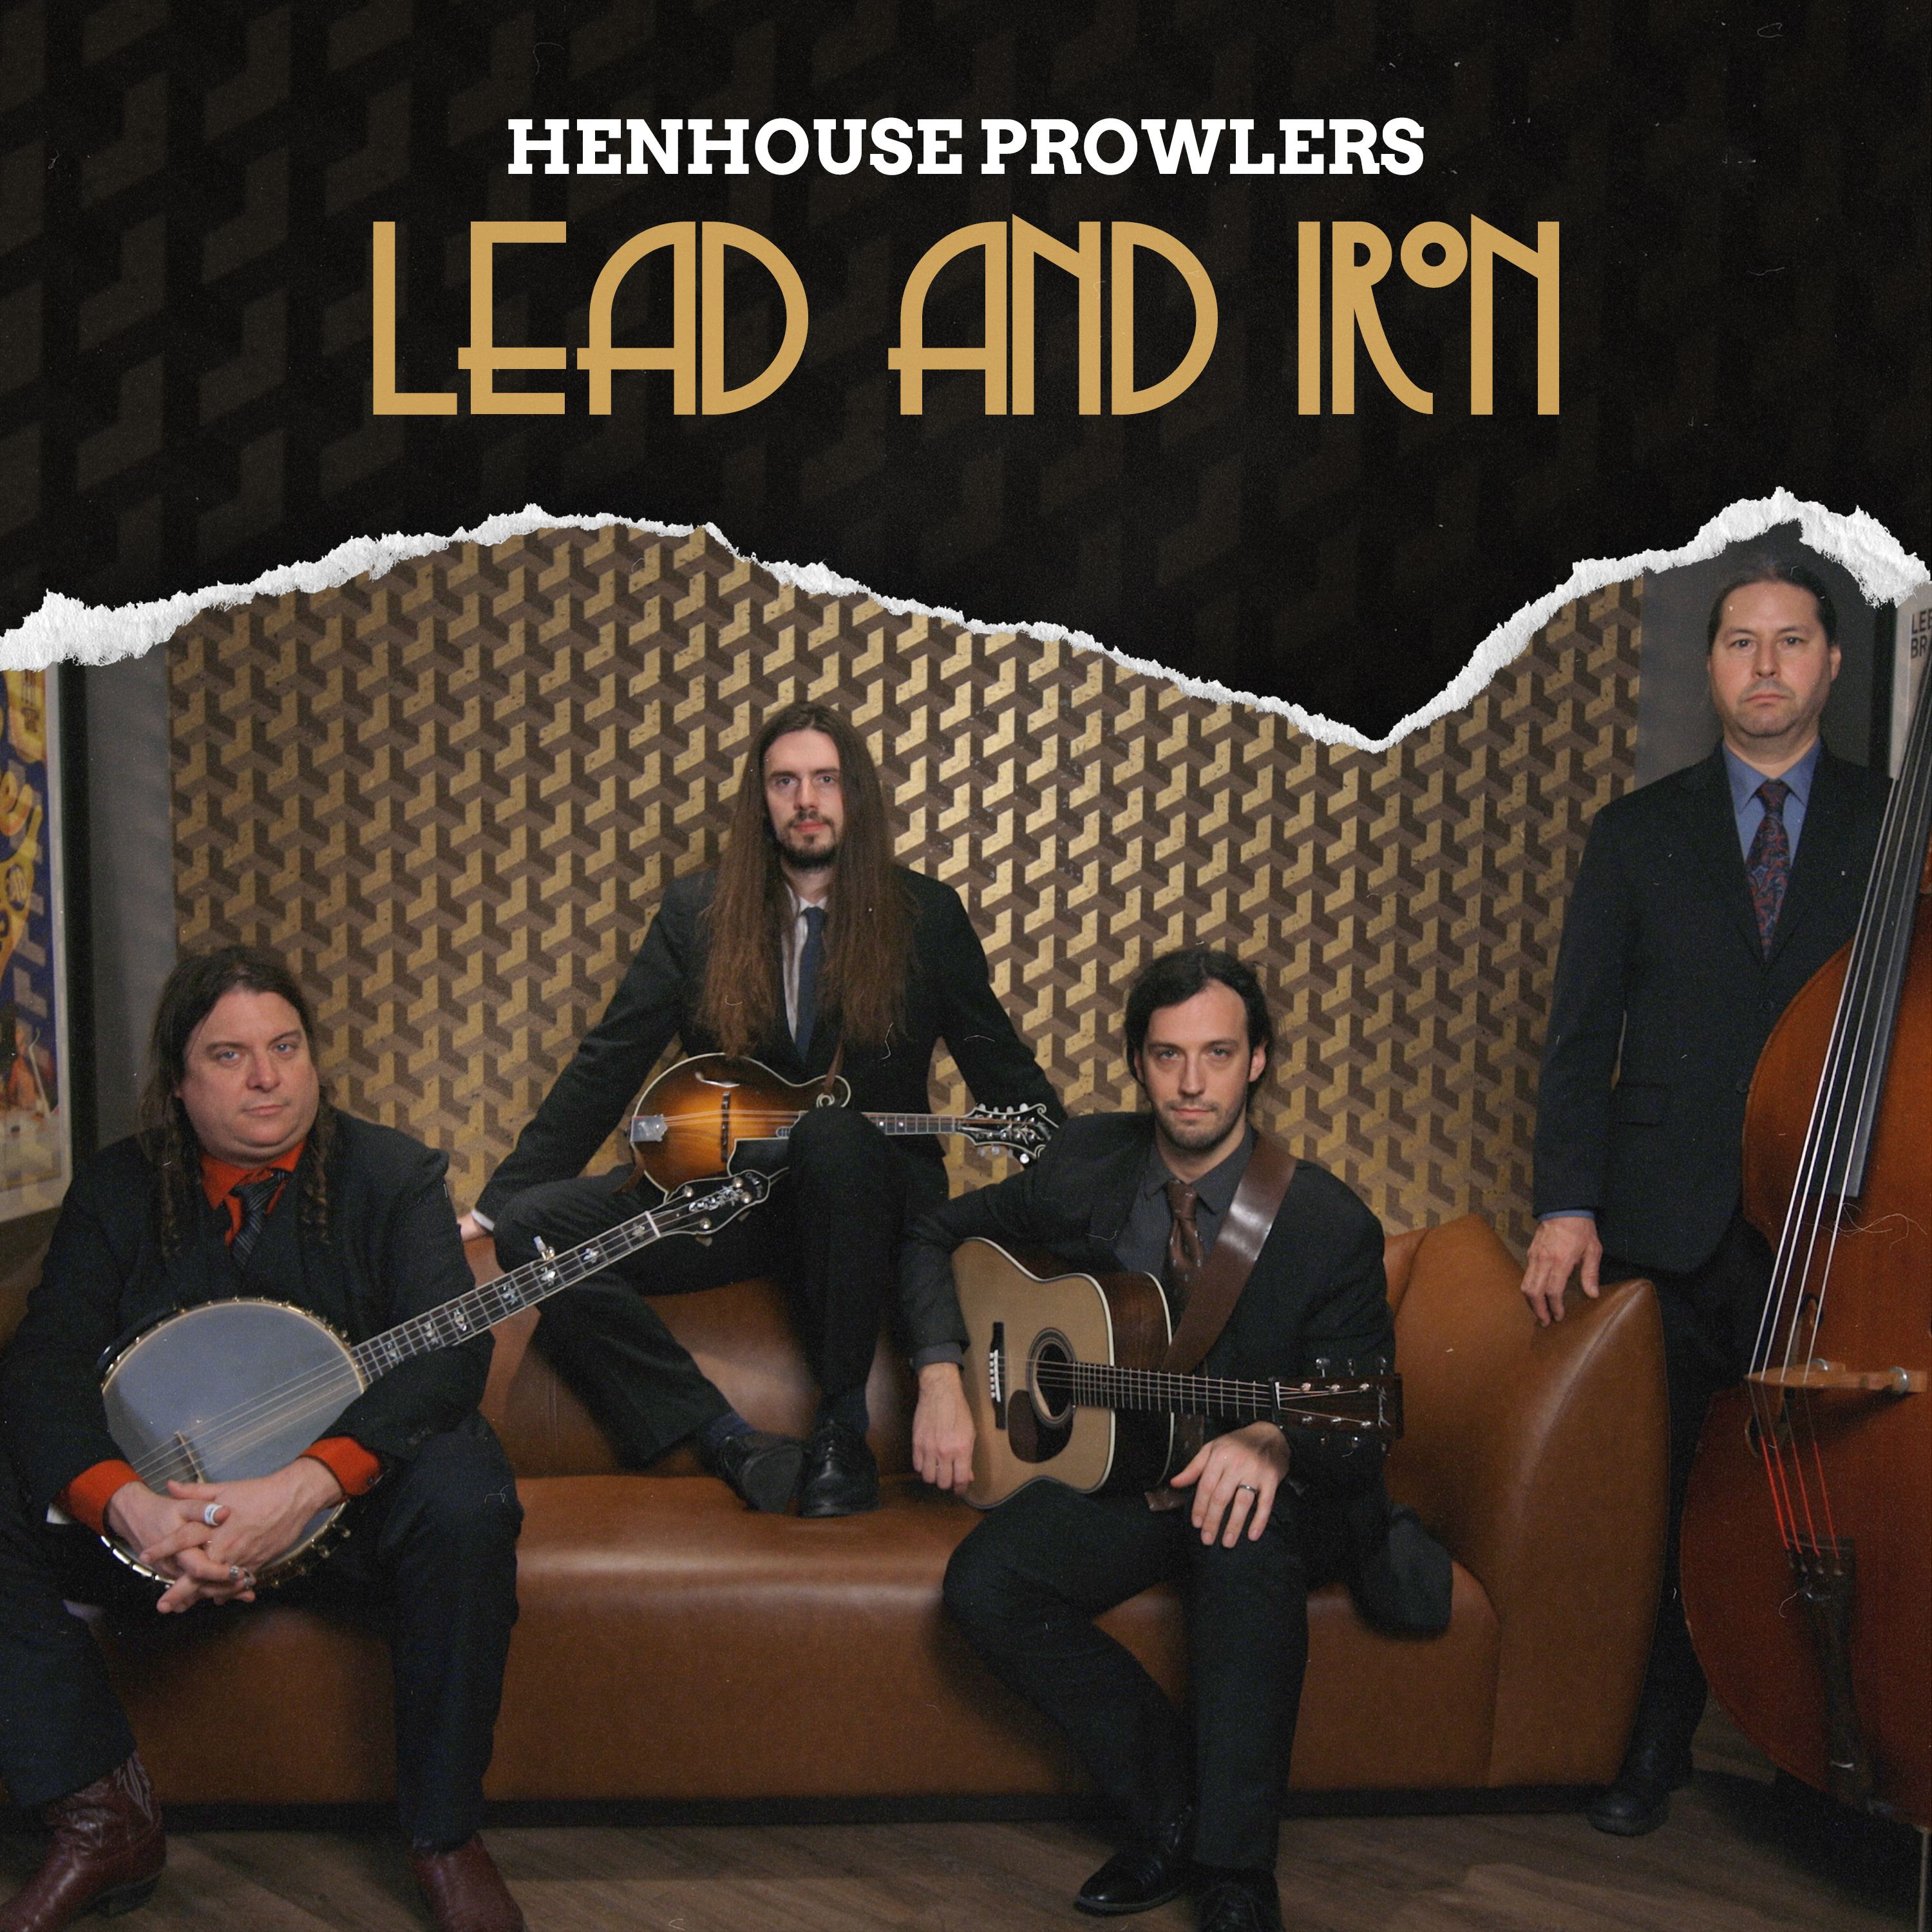 Henhouse Prowlers release new single and music video "Lead and Iron"